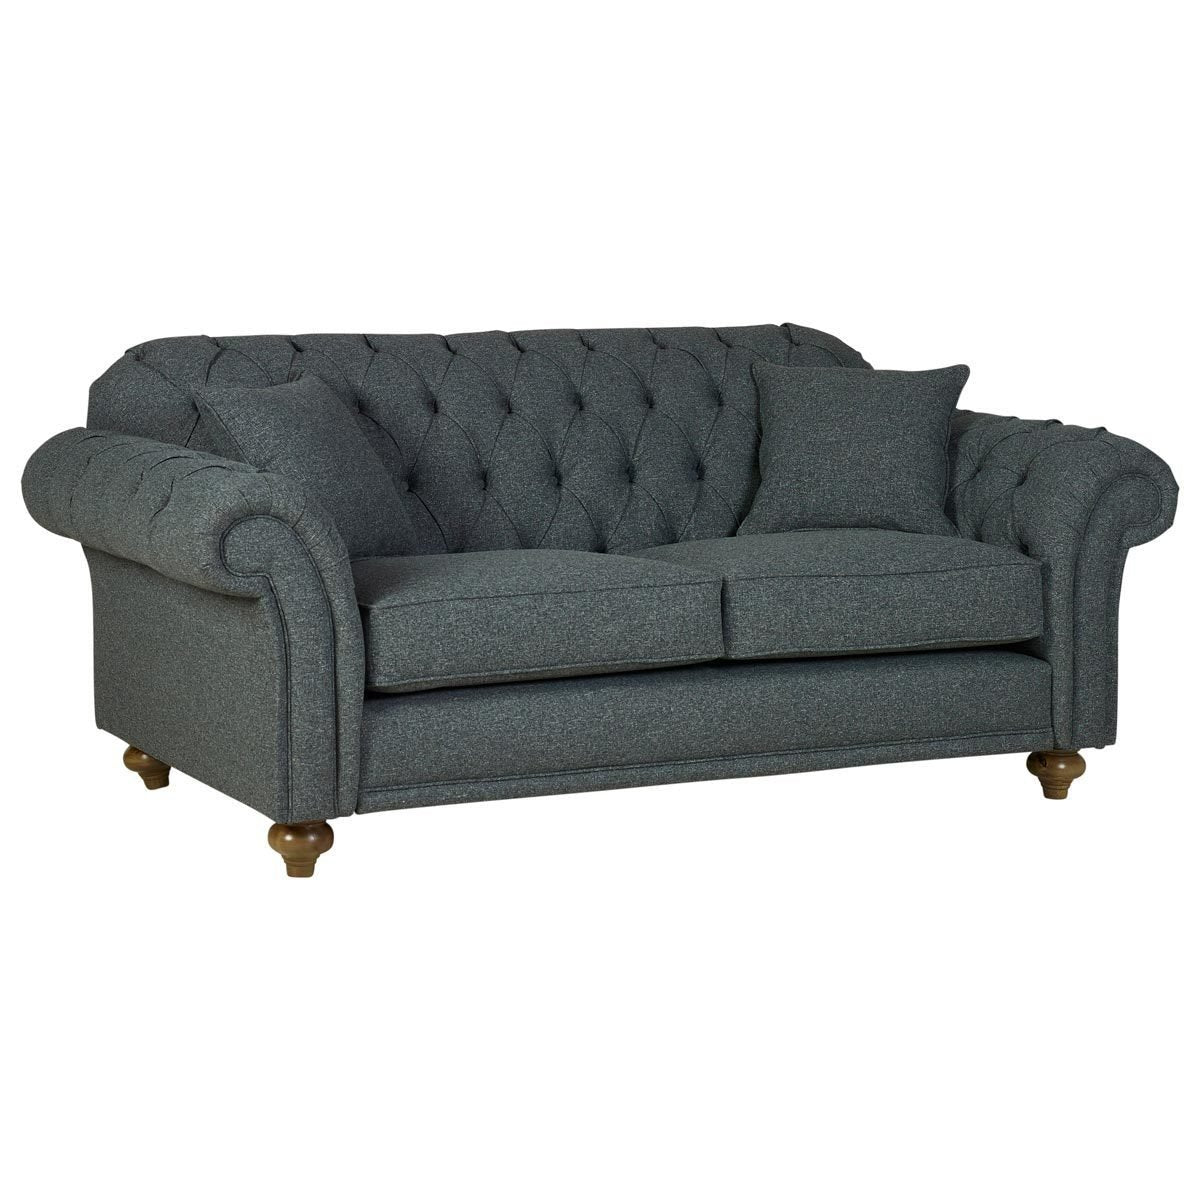 Bordeaux Button Back 2 Seater Fabric Sofa, Grey - Signature Retail Stores